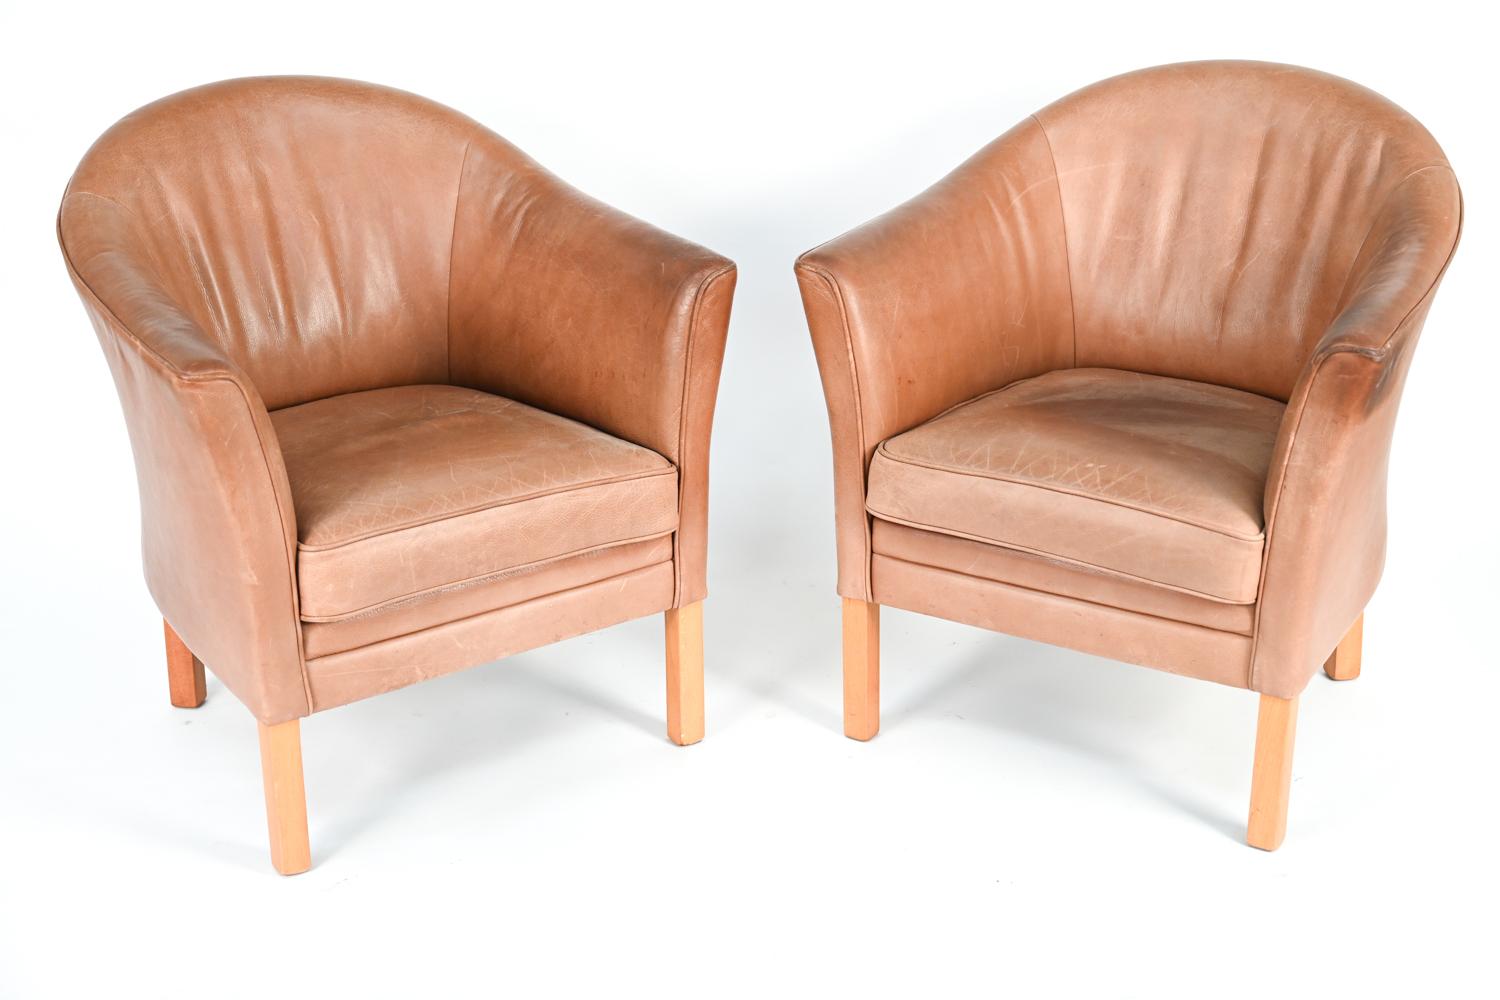 A pair of Danish mid-century armchairs by Mogens Hansen upholstered in leather.